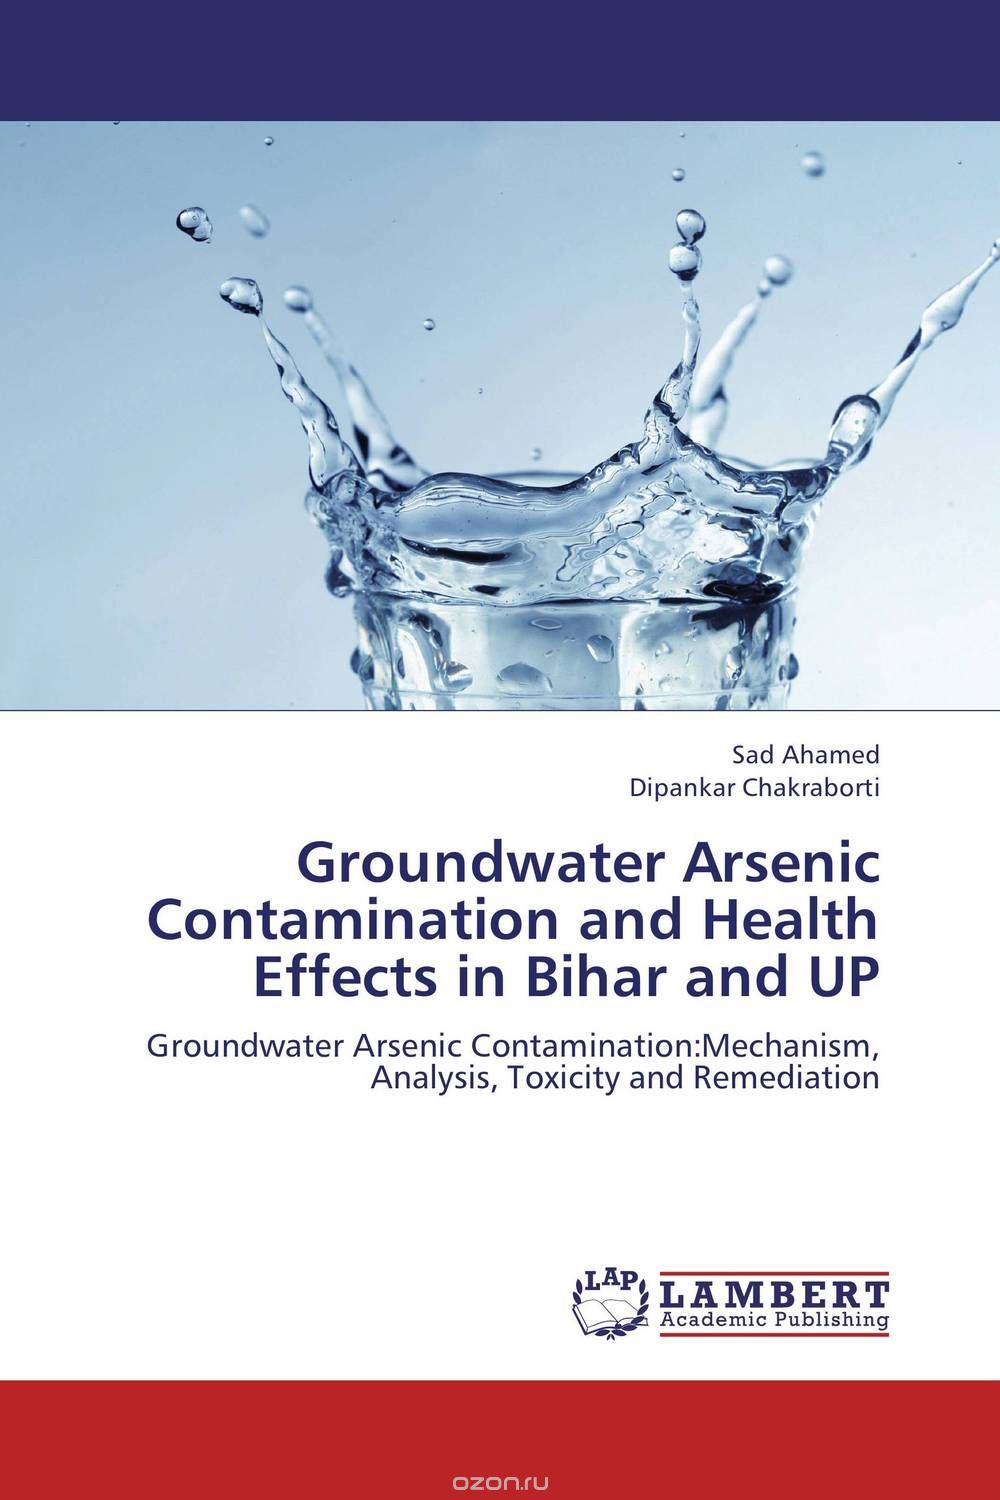 Скачать книгу "Groundwater Arsenic Contamination and Health Effects in Bihar and UP"